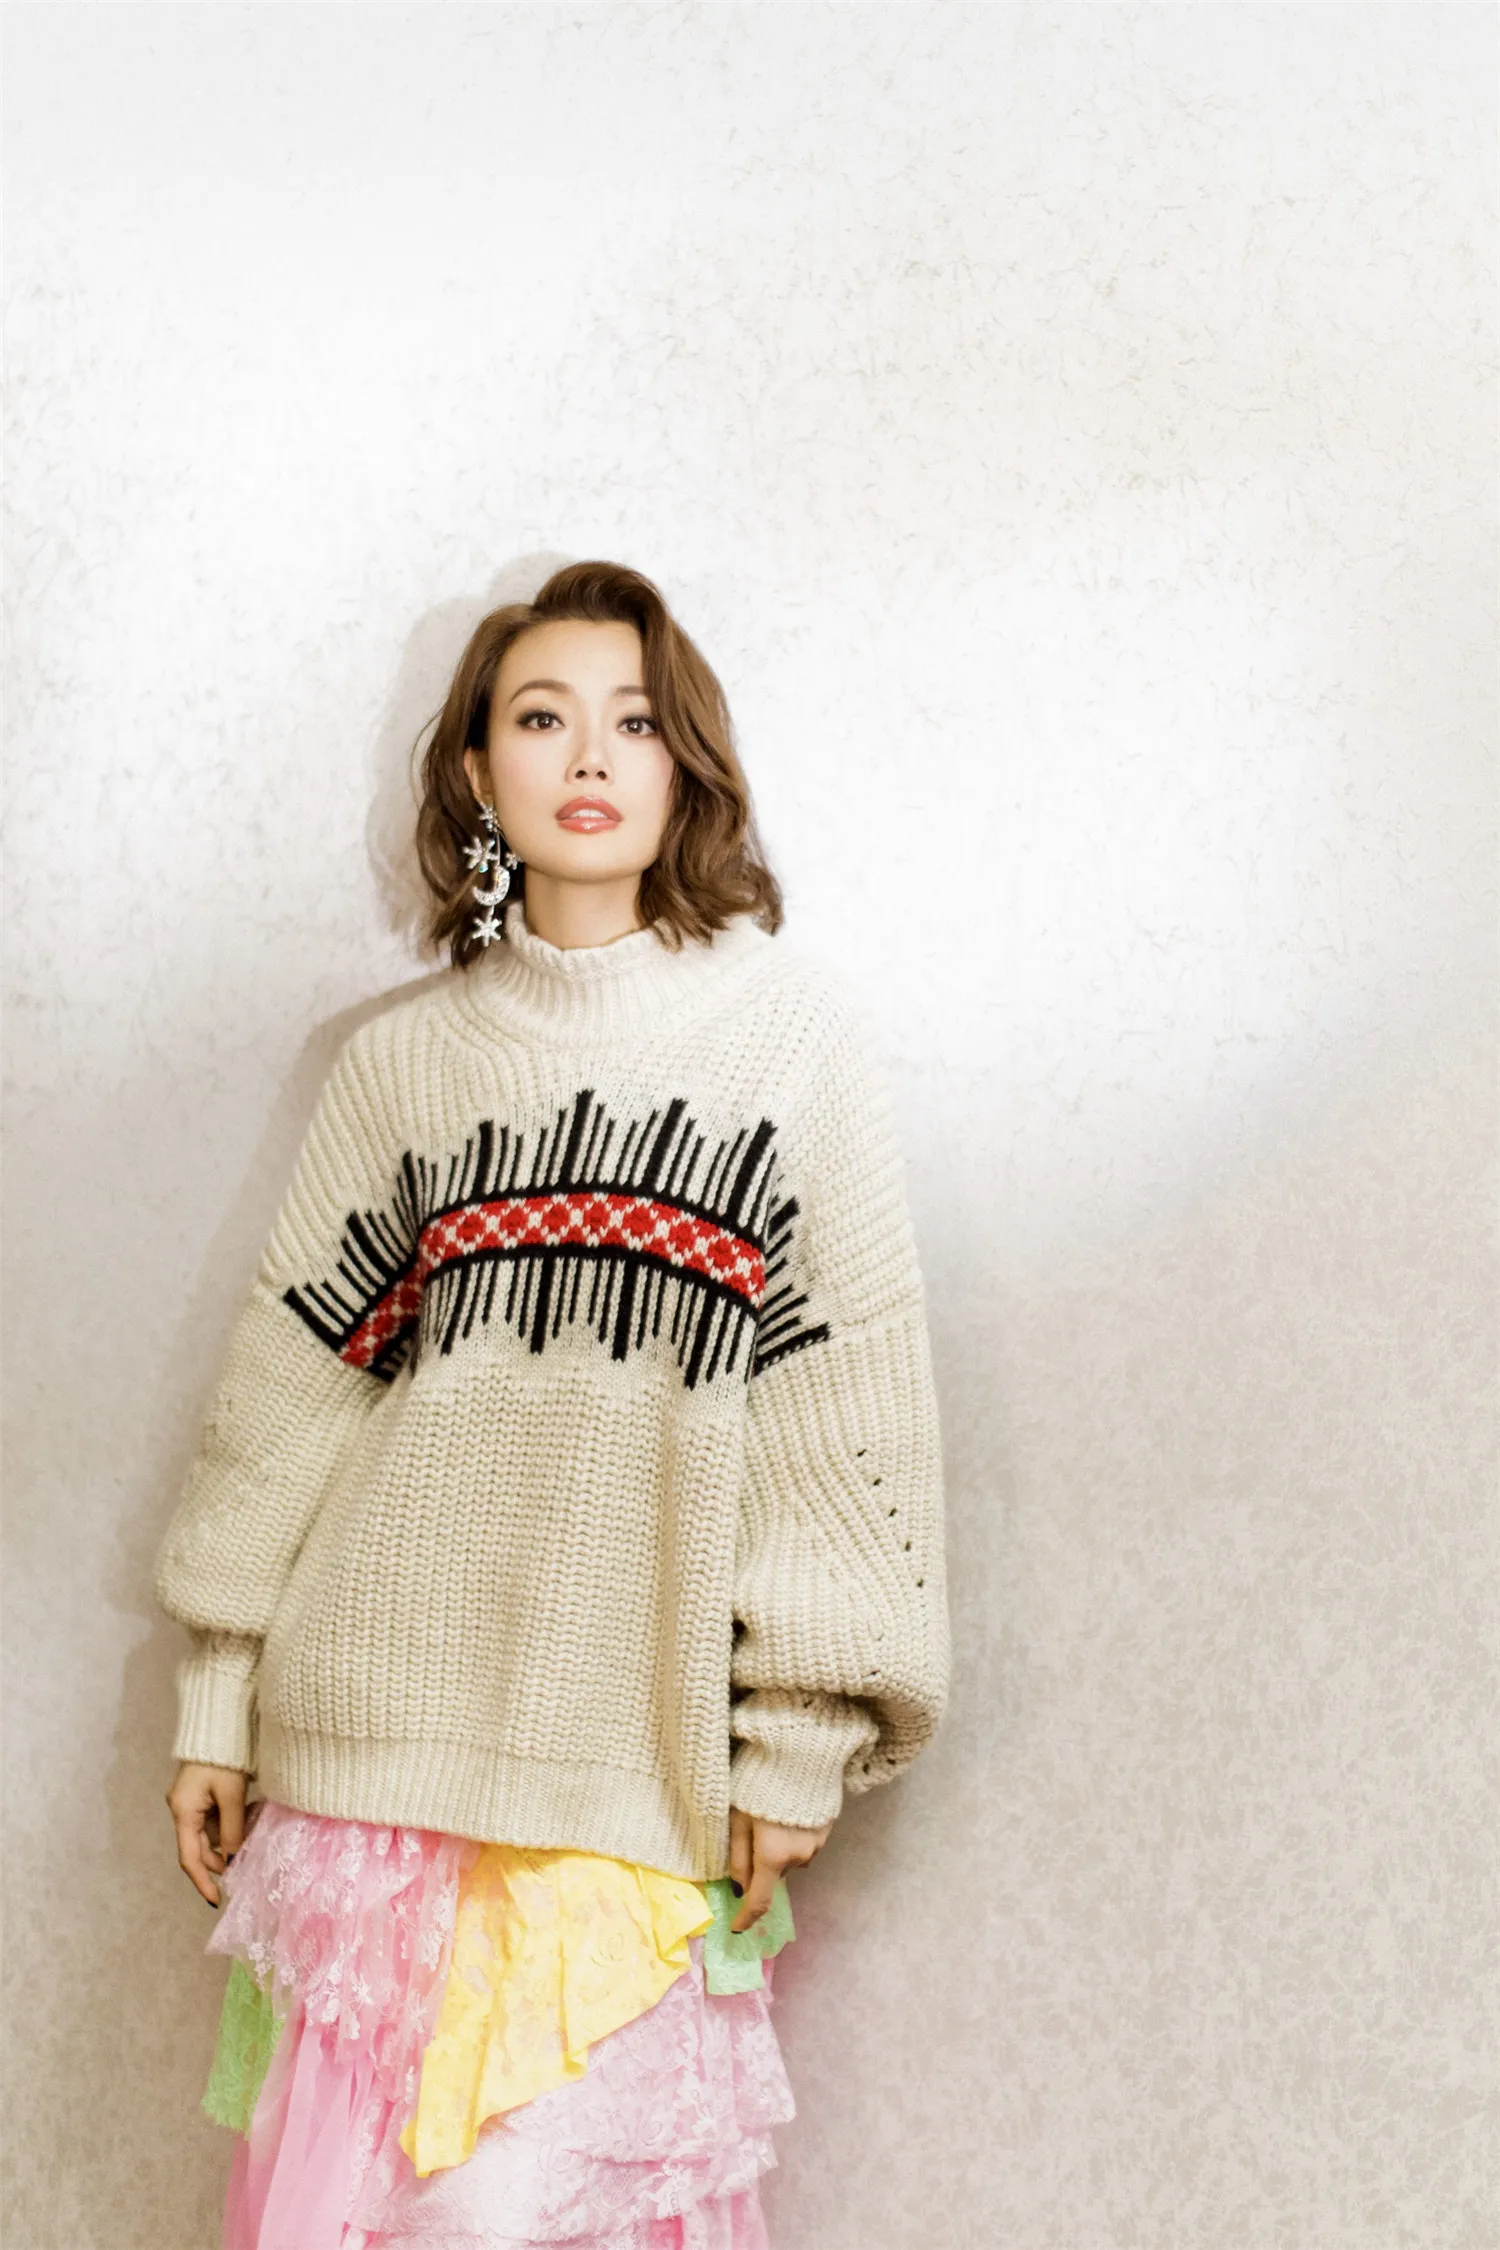 Joey Yung with picture 3. JPG